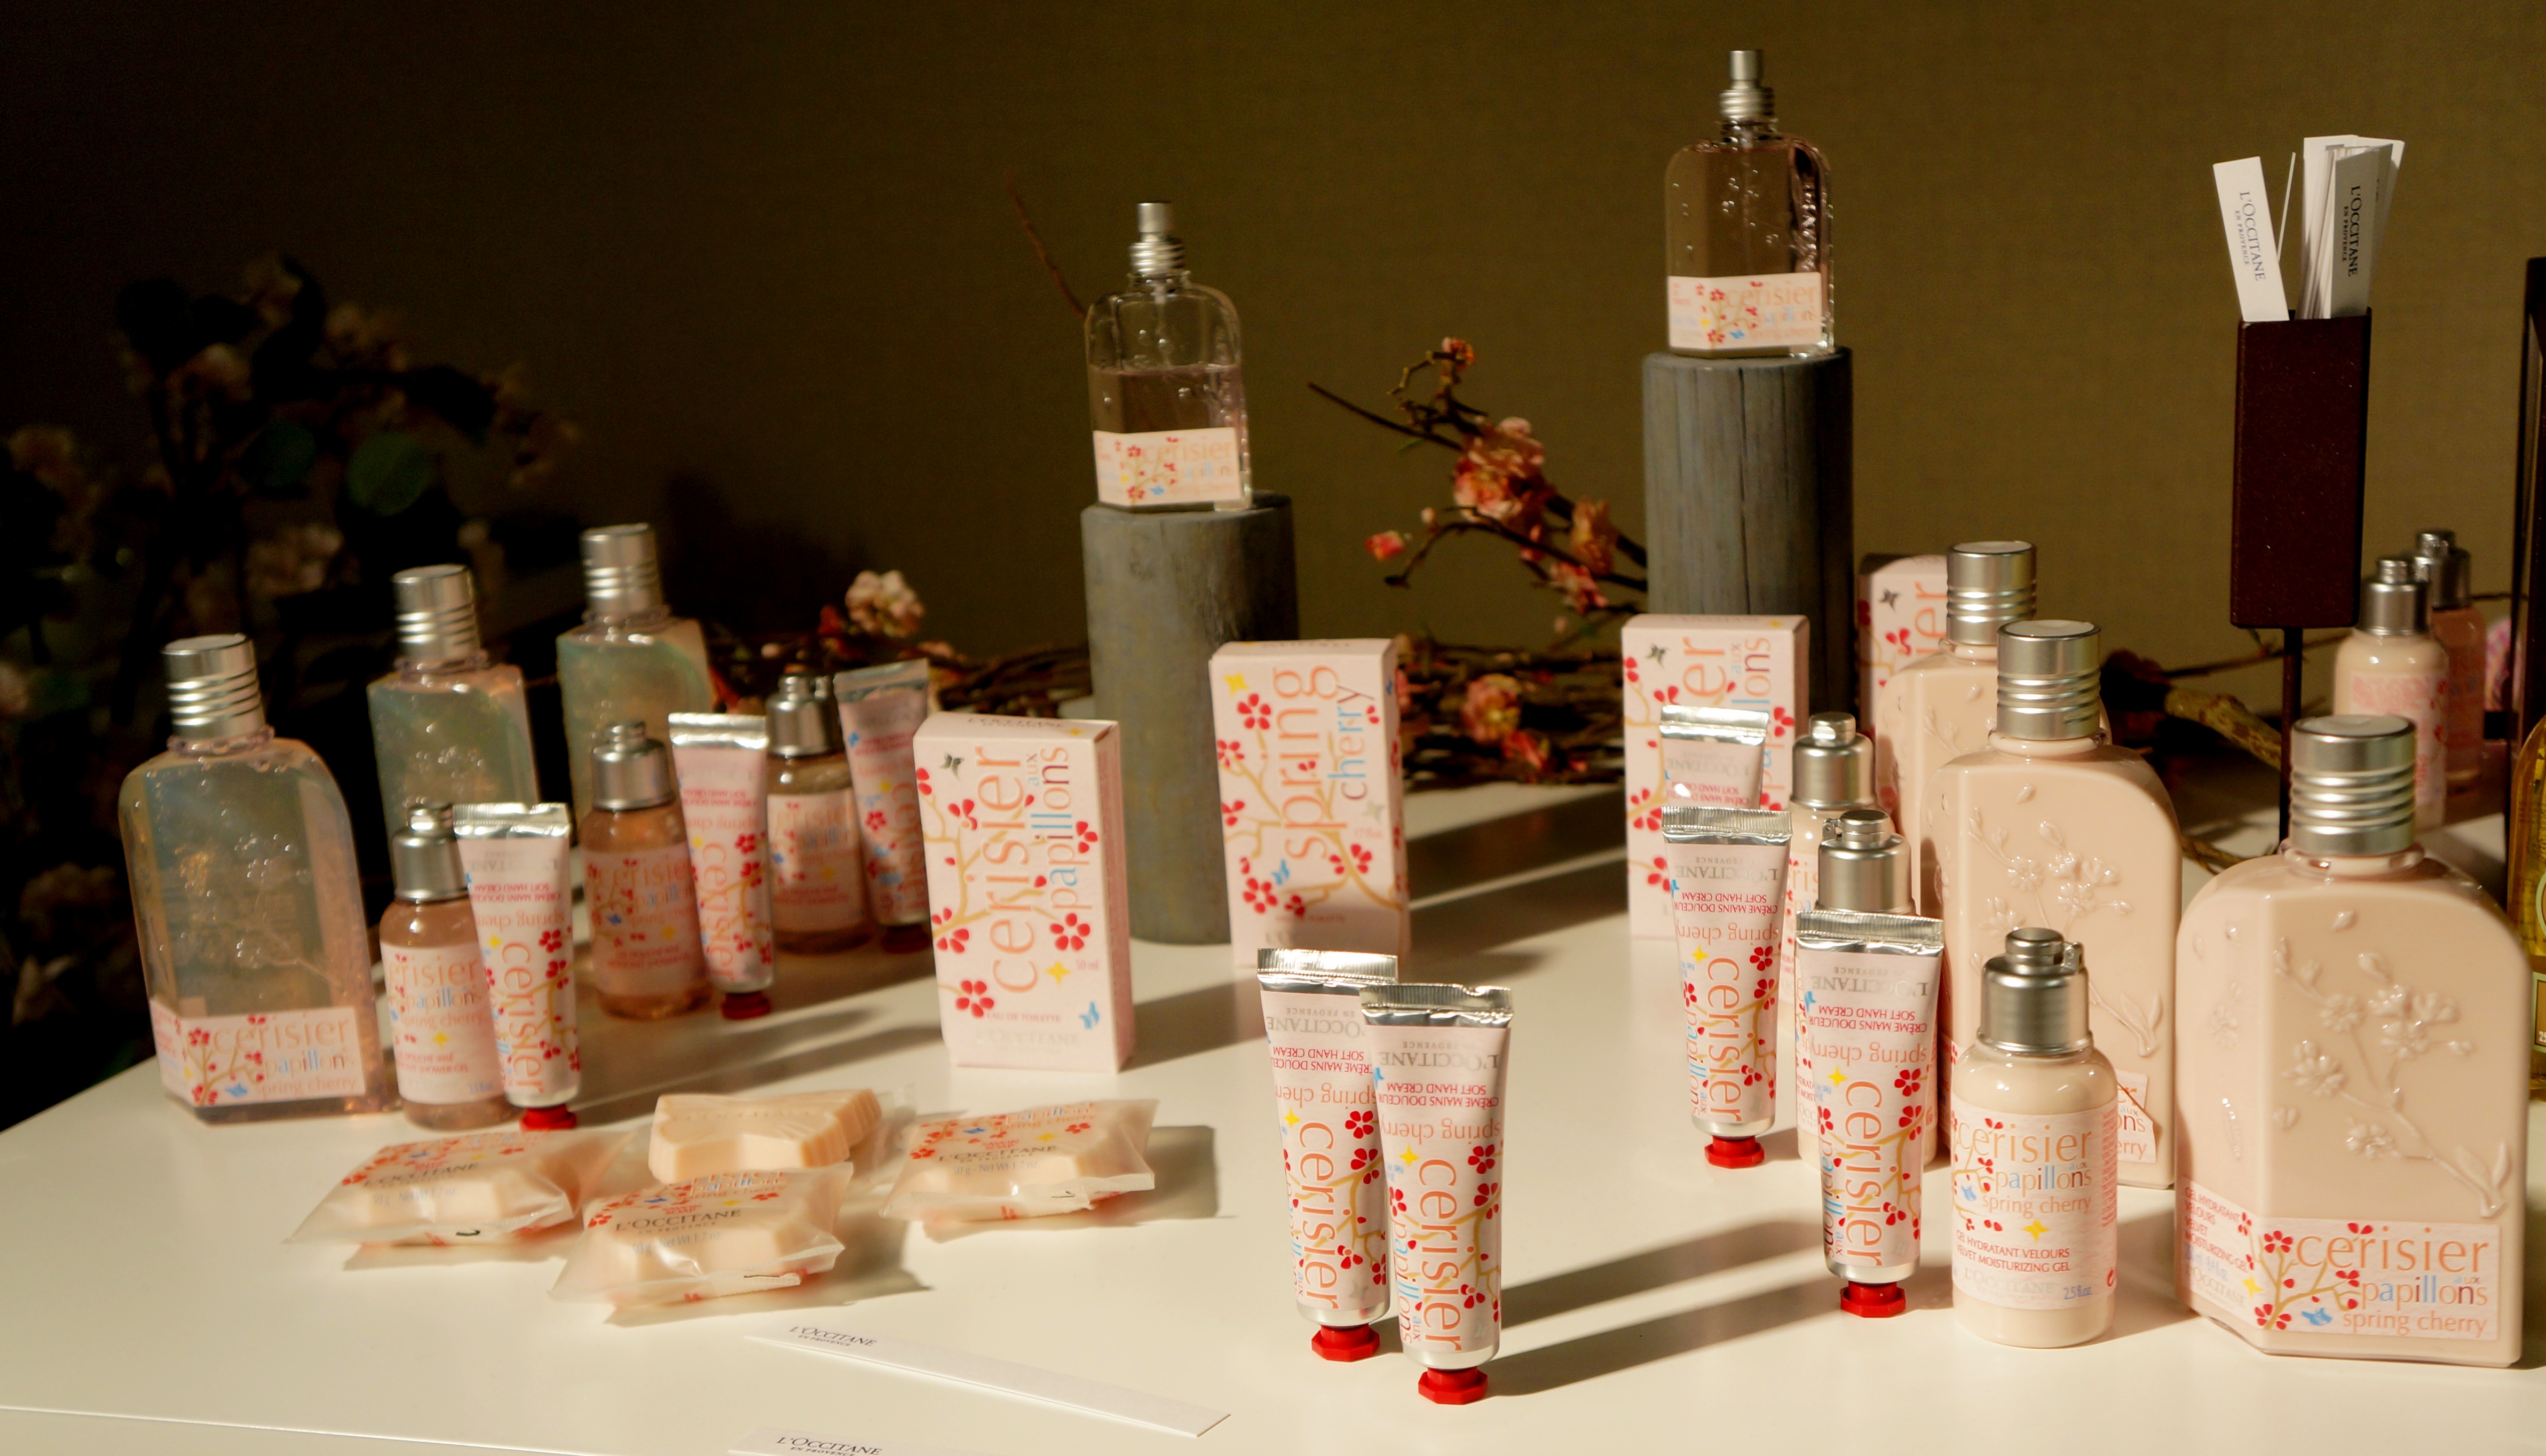 Spring Cherry limited edition by L'Occitane/ Pic by kiwikoo